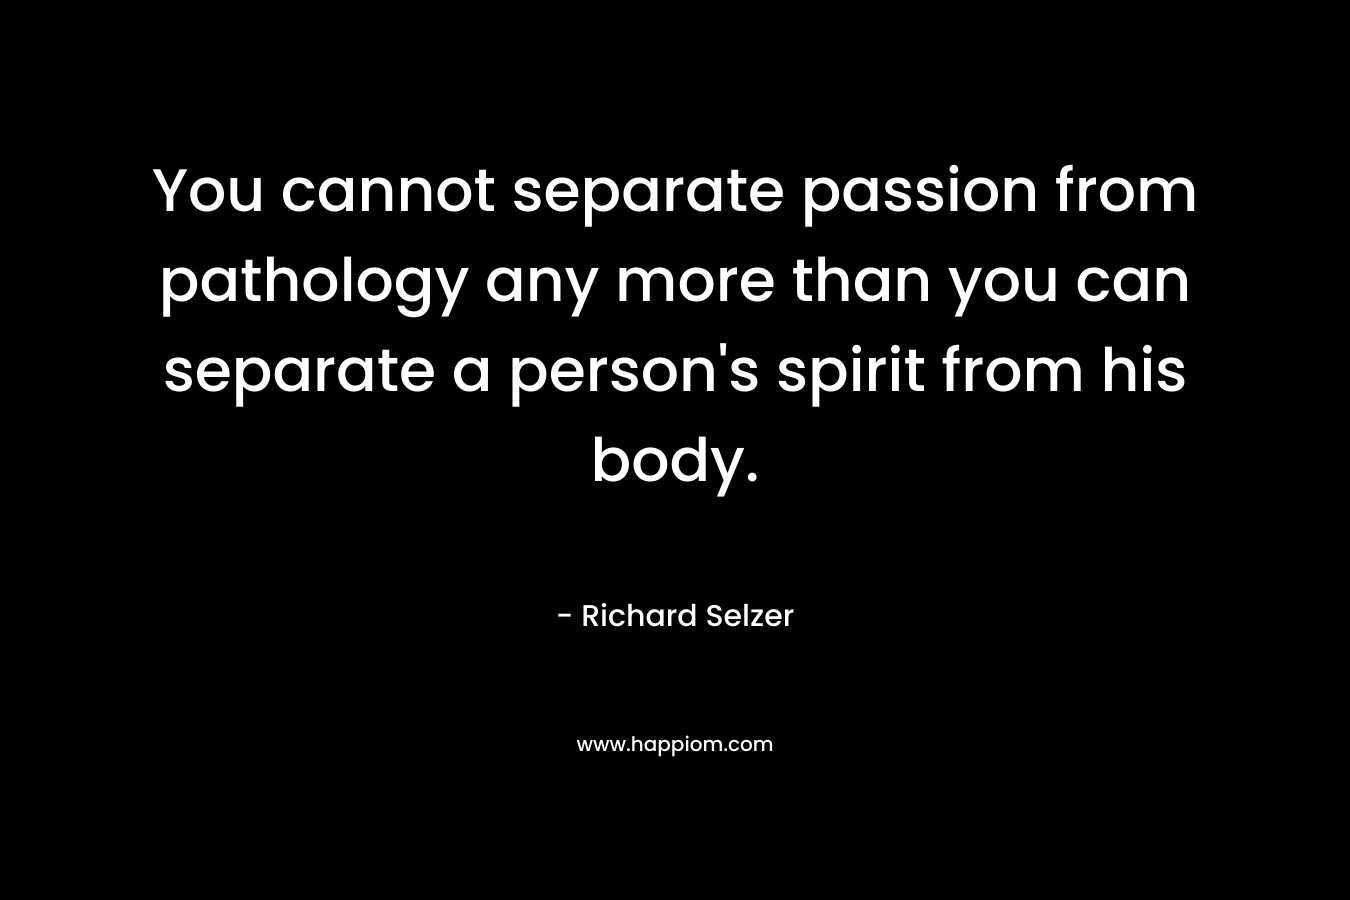 You cannot separate passion from pathology any more than you can separate a person's spirit from his body.